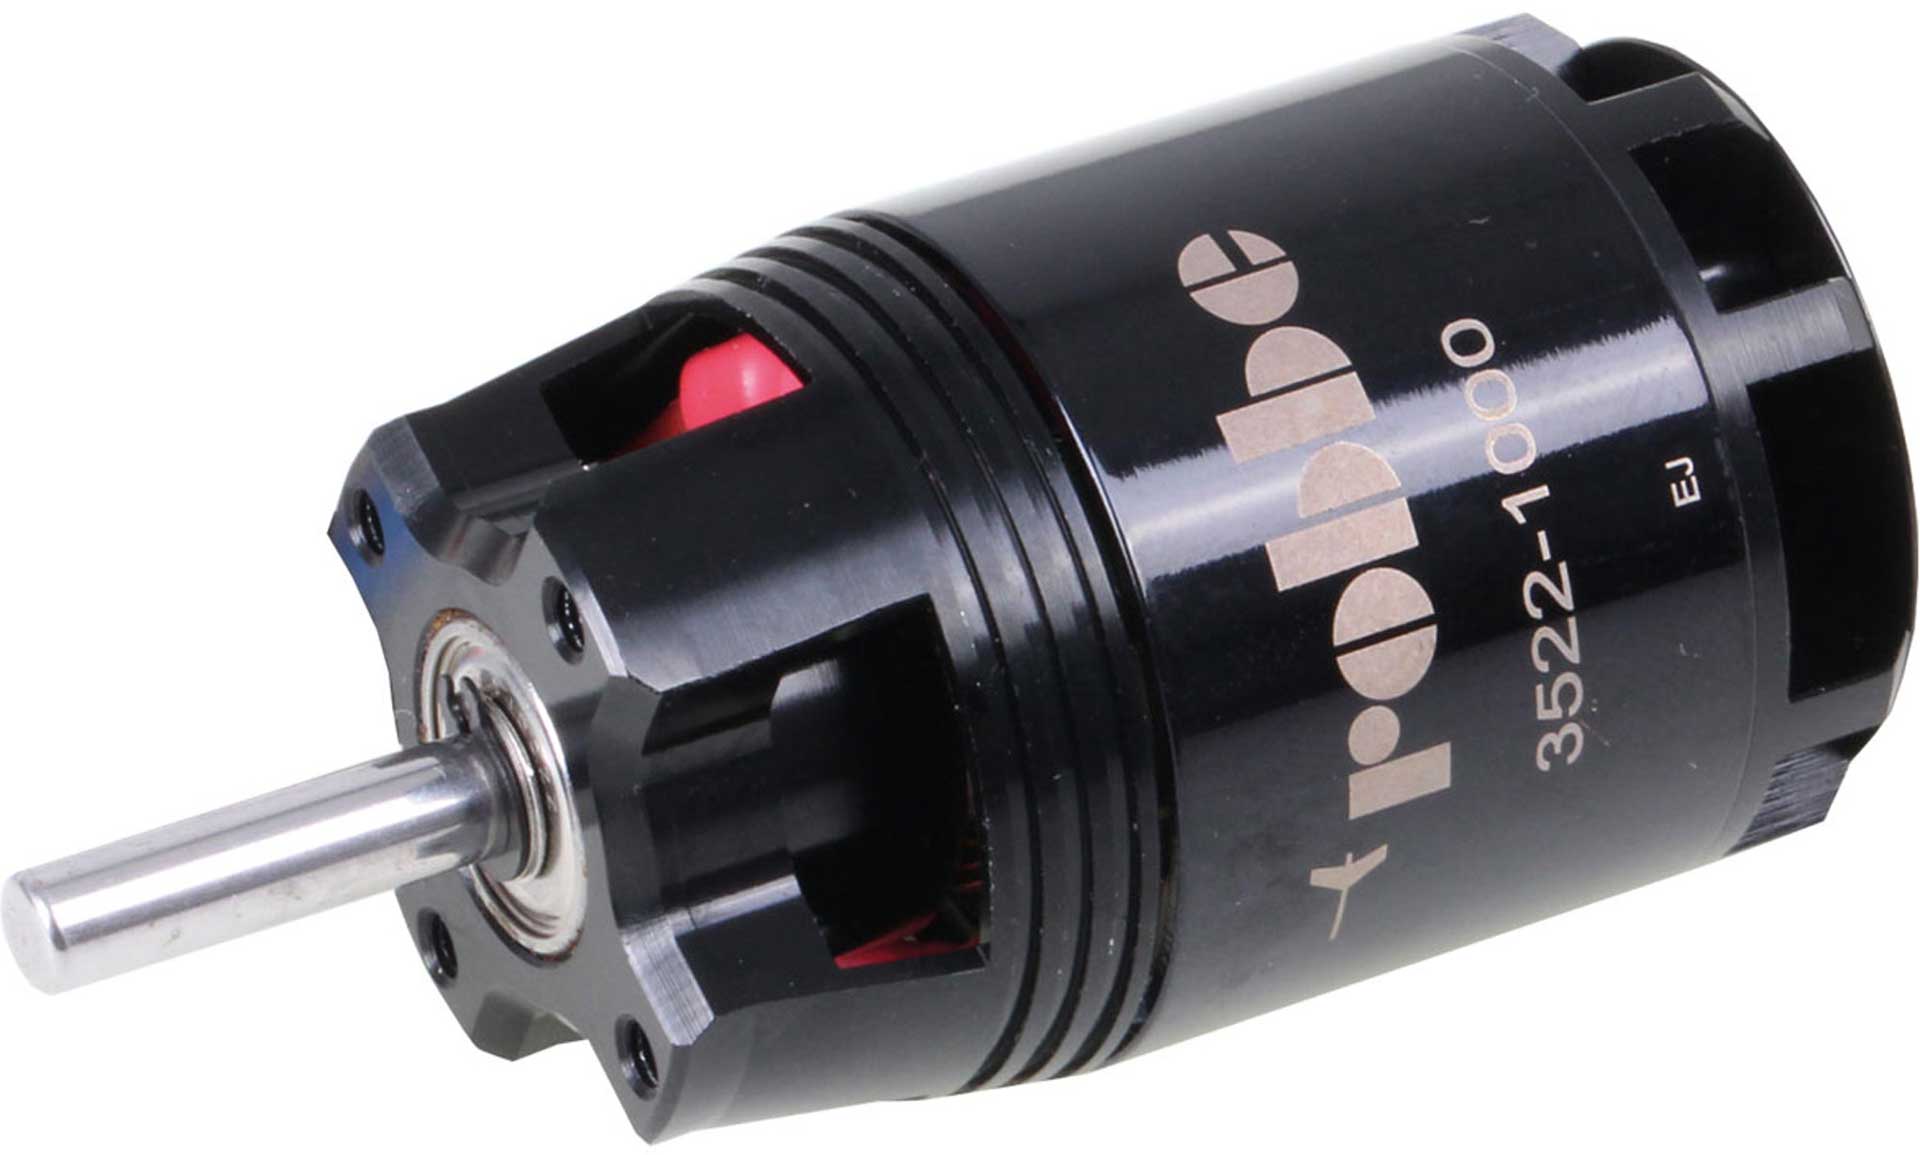 Brushless Motor3 The Difference Between Brushless Motor and Brushed Motor